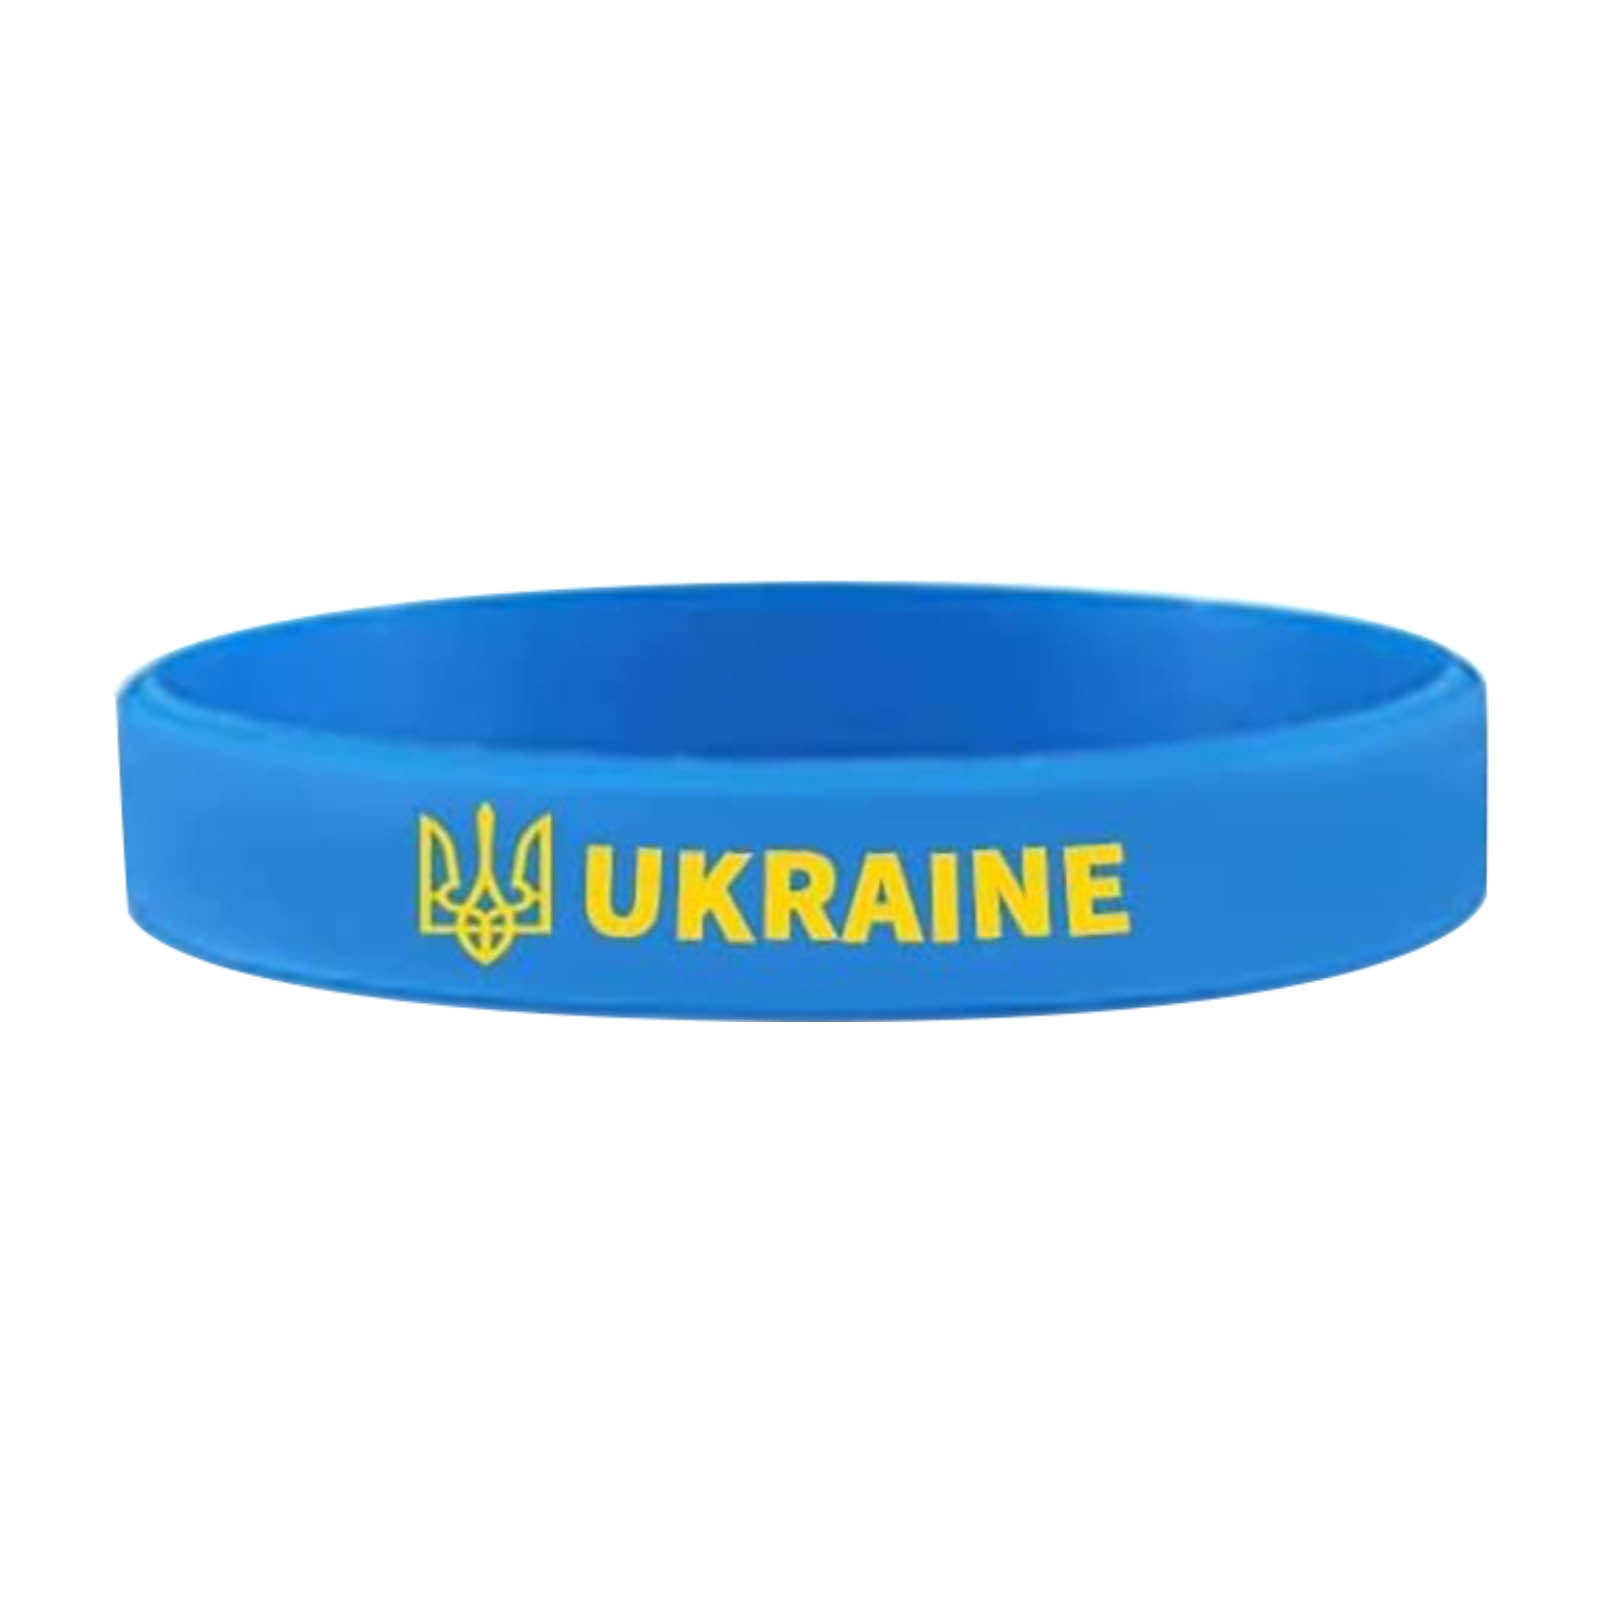 Silicone Bracelet,Country Flag Silicone Bracelet Wristbands Soccer fan Accessories Countries Flags Wristband Souvenir Sport Bracelets Football Silicone Bracelet Cheerleading Supplies